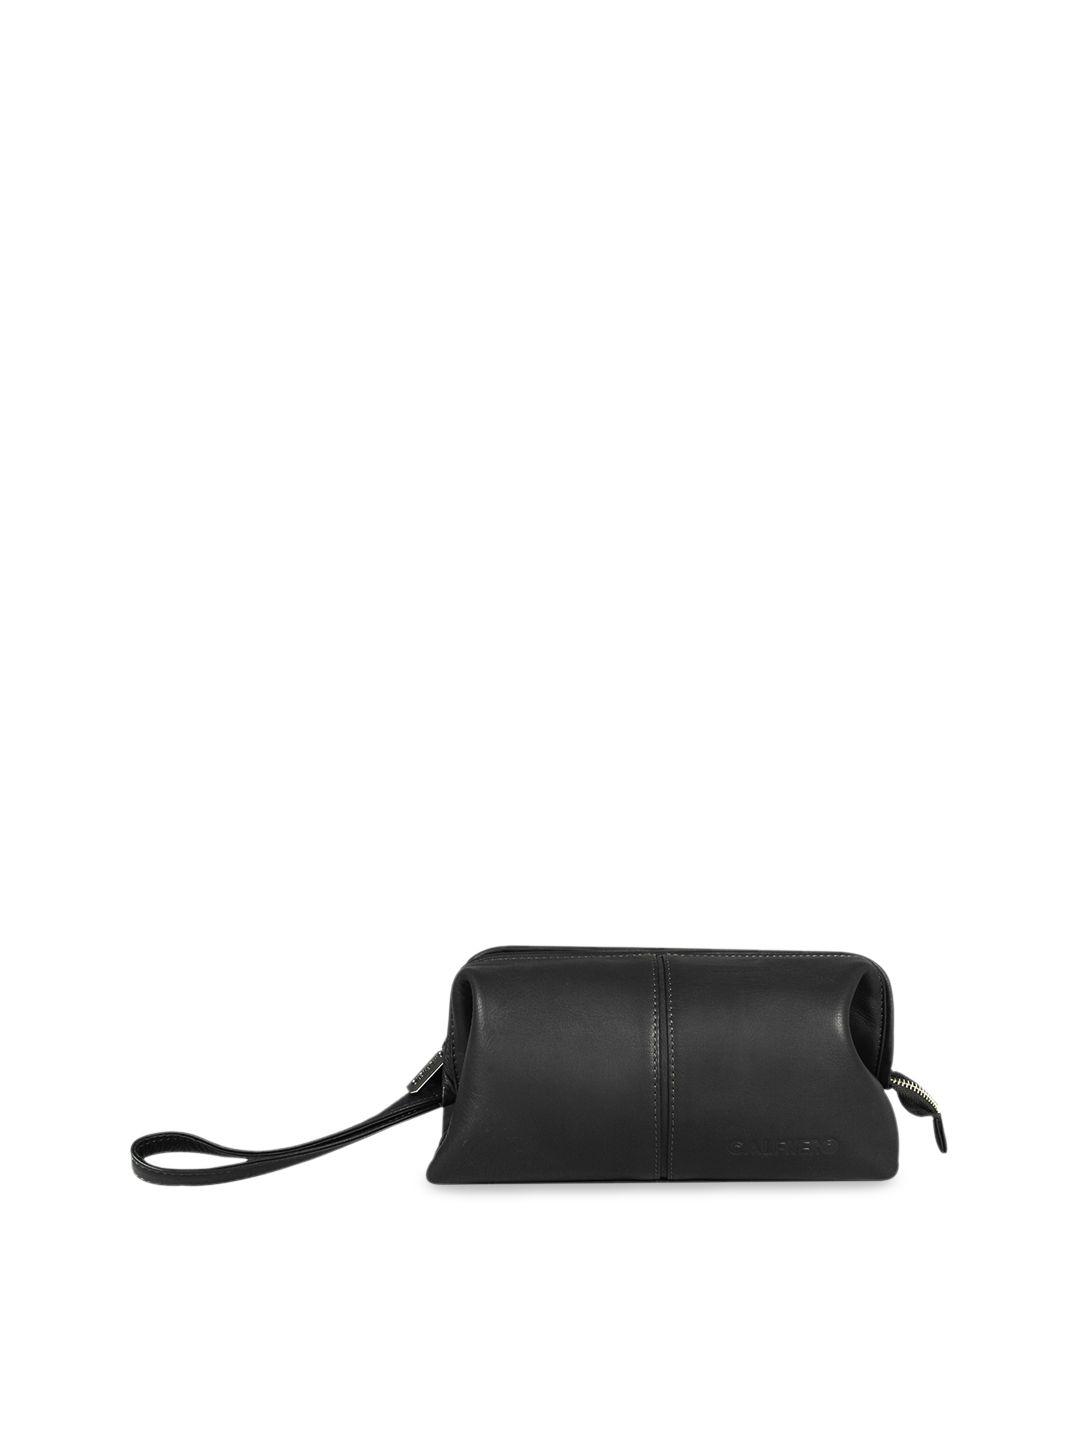 calfnero unisex black leather travell pouch